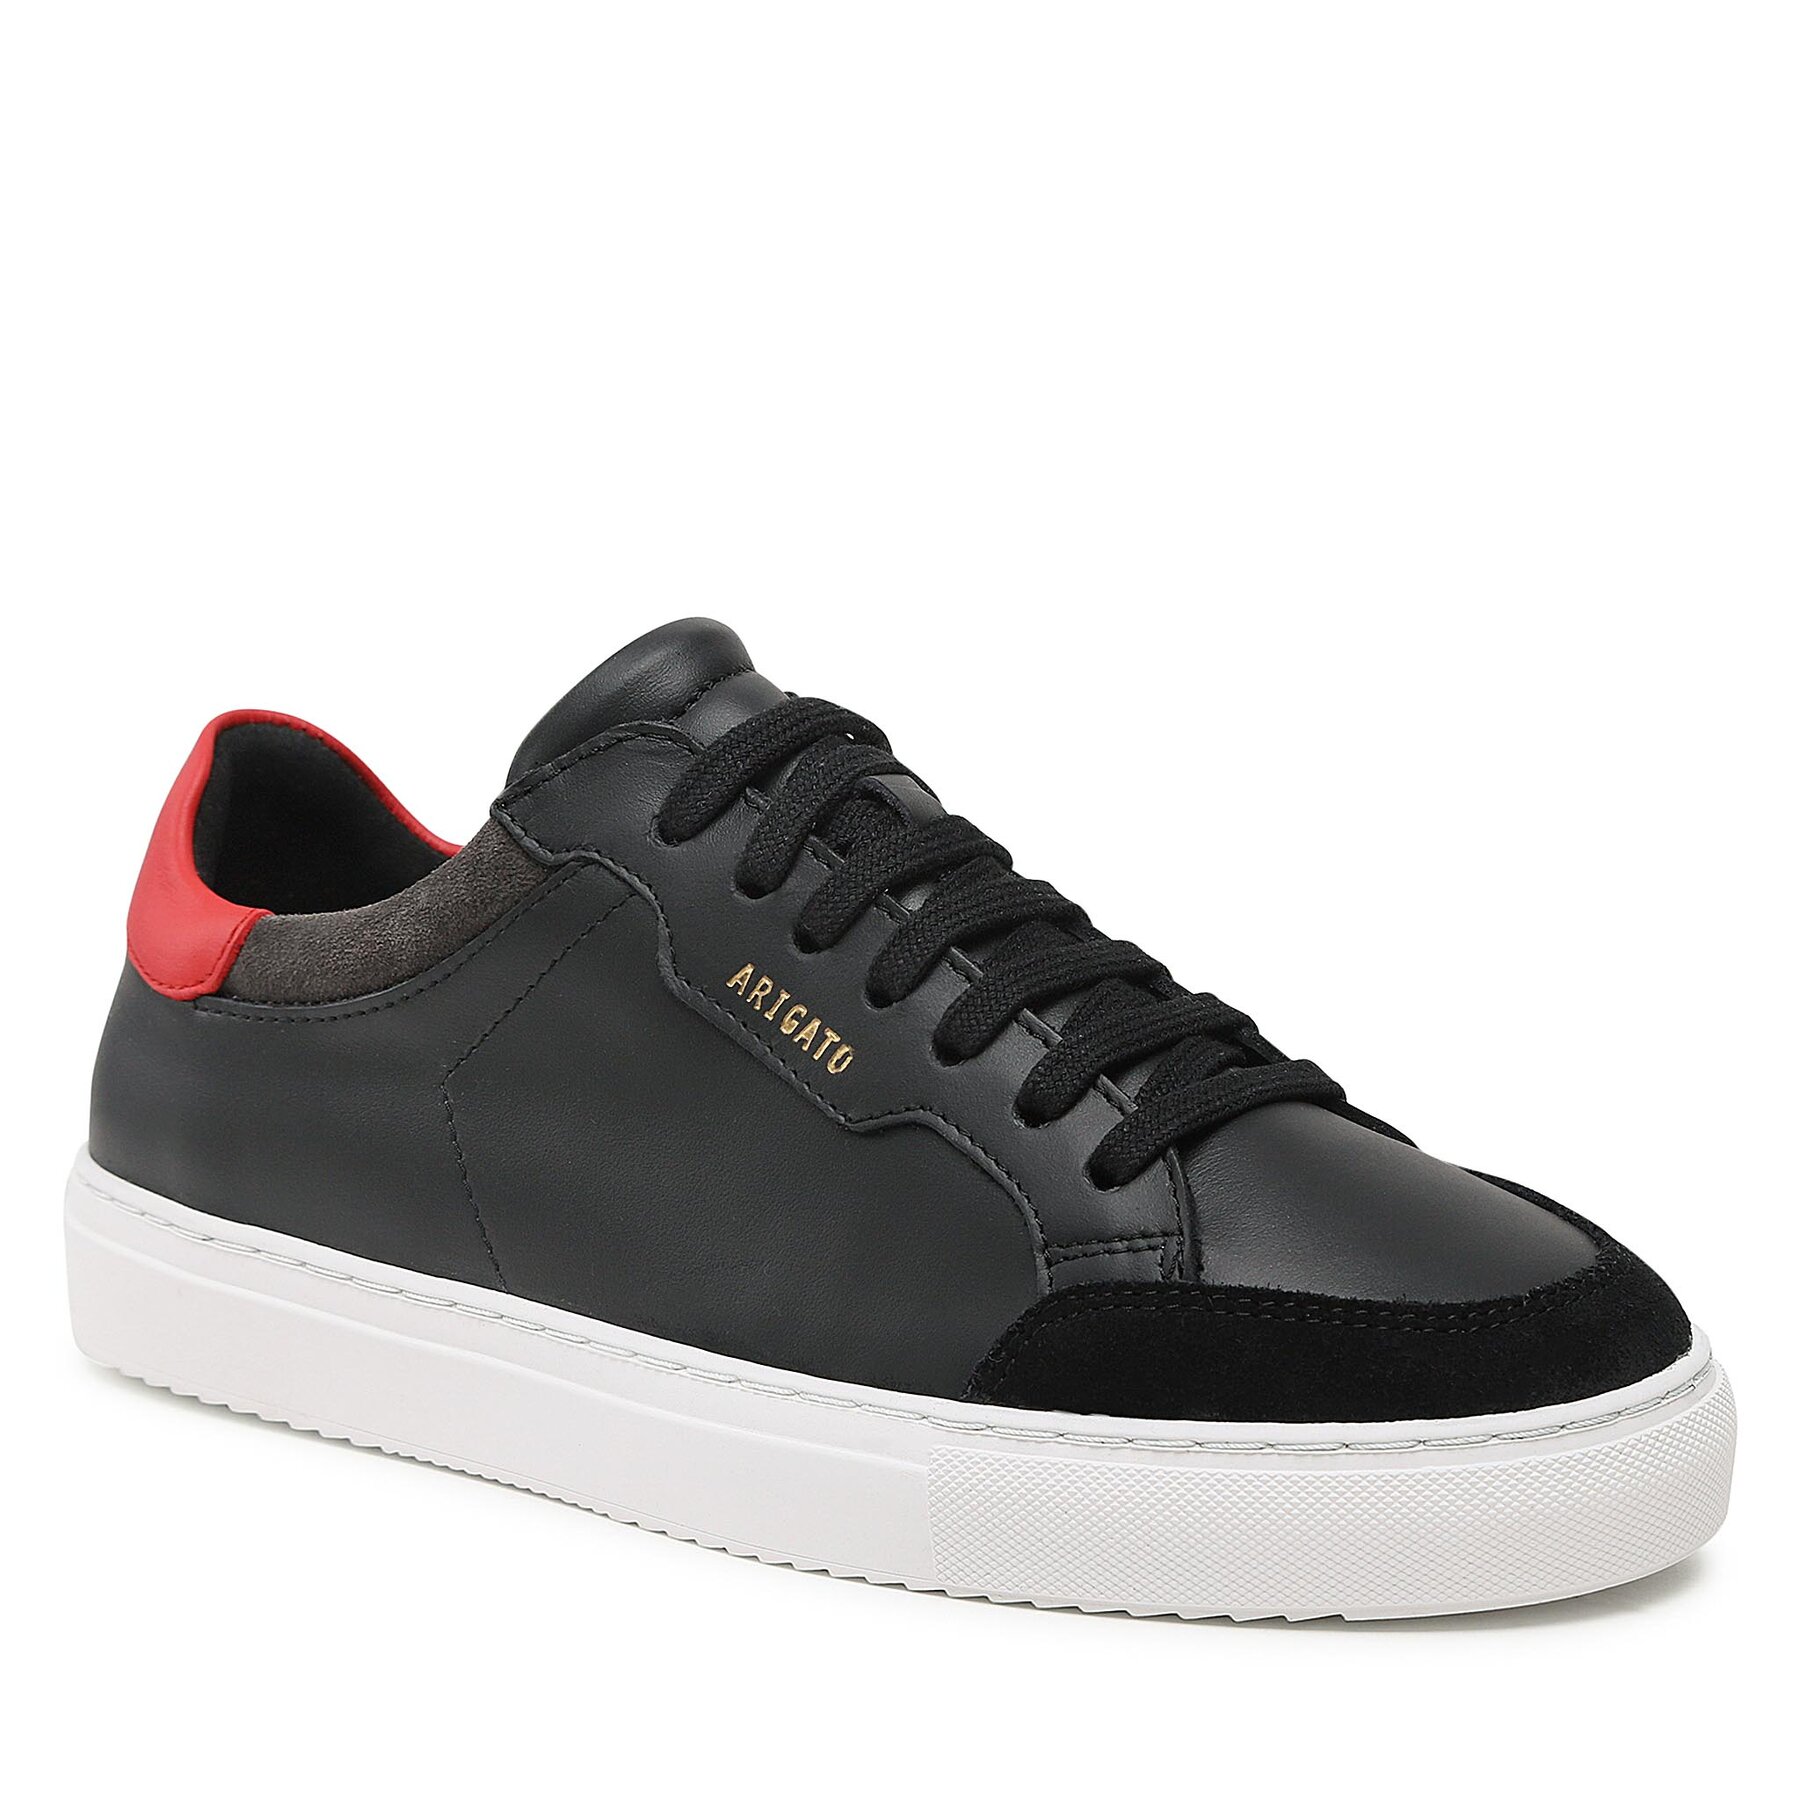 Sneakers Axel Arigato Clean 180 Remix With Toe F1036004 Black/Red 180 imagine noua